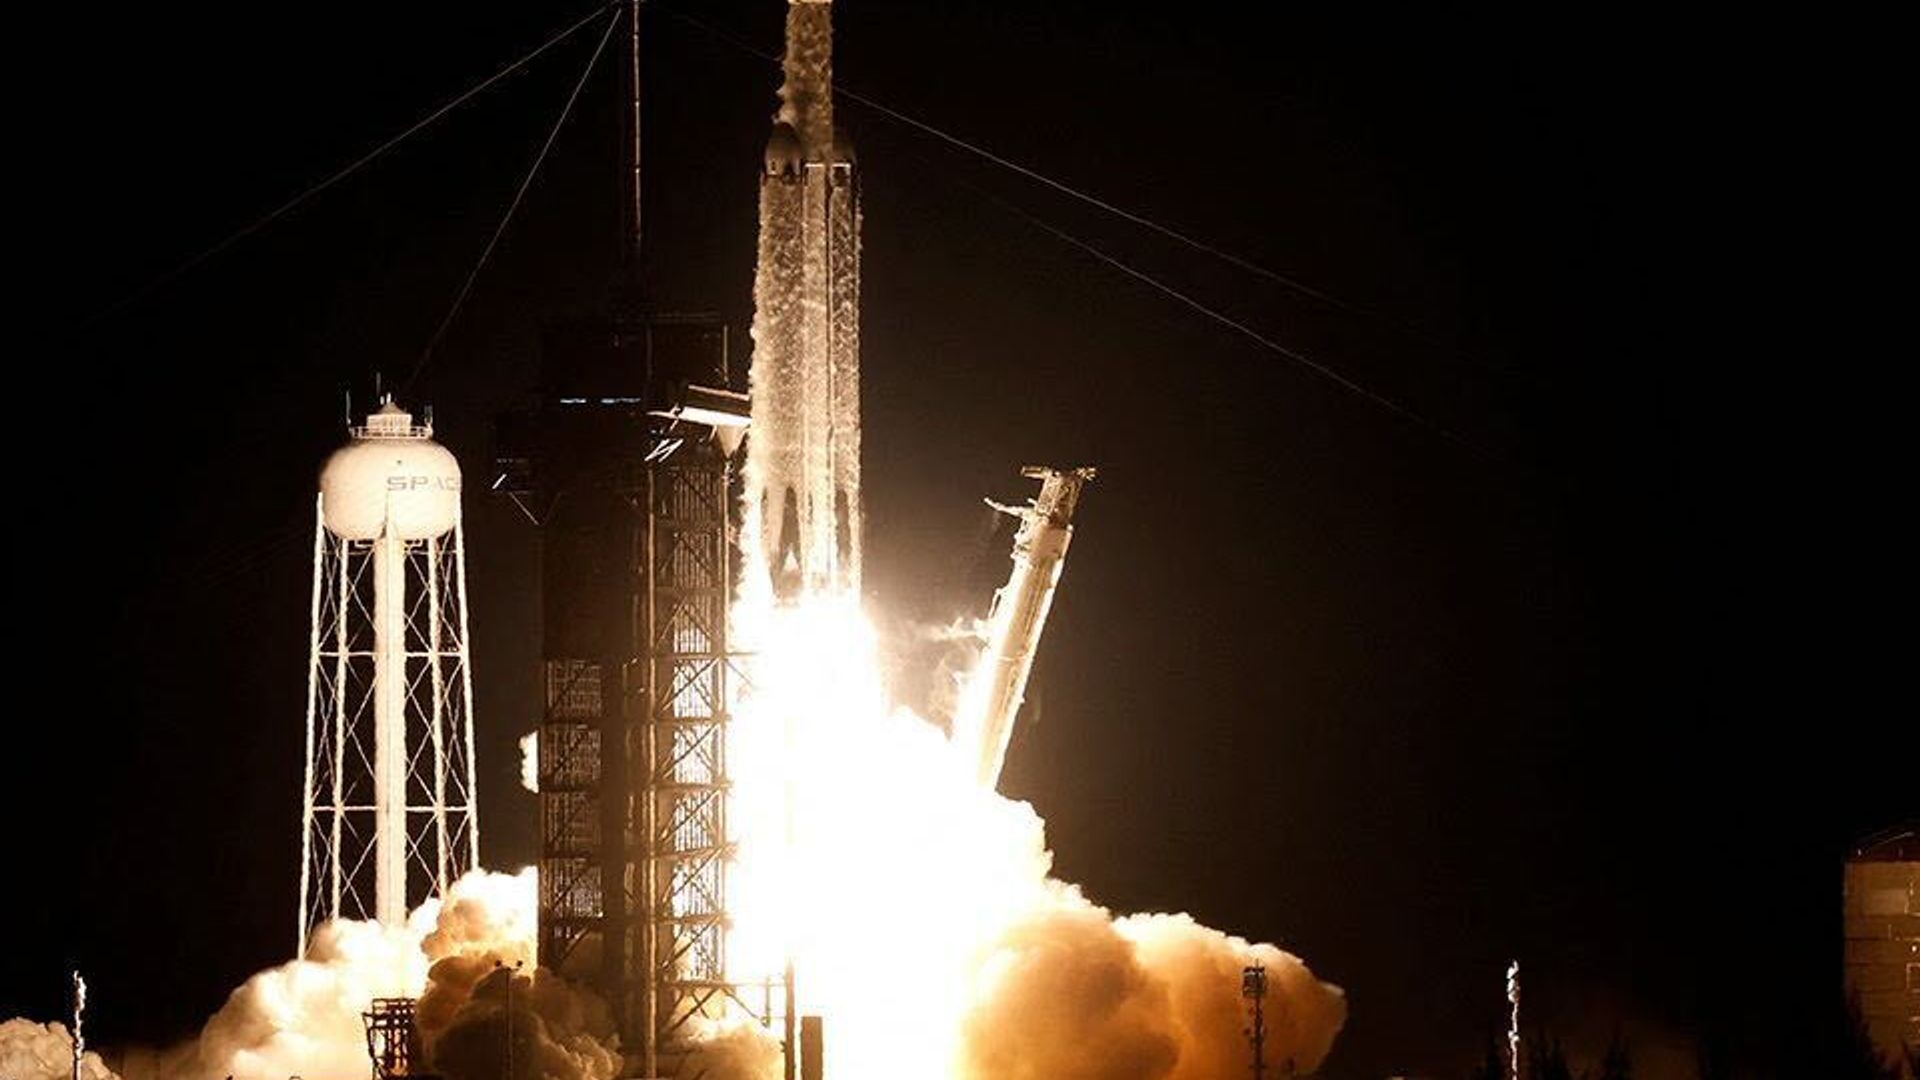 The U.S. military's X-37B robot space plane blasted off on another secretive mission Thursday night with the help of SpaceX.